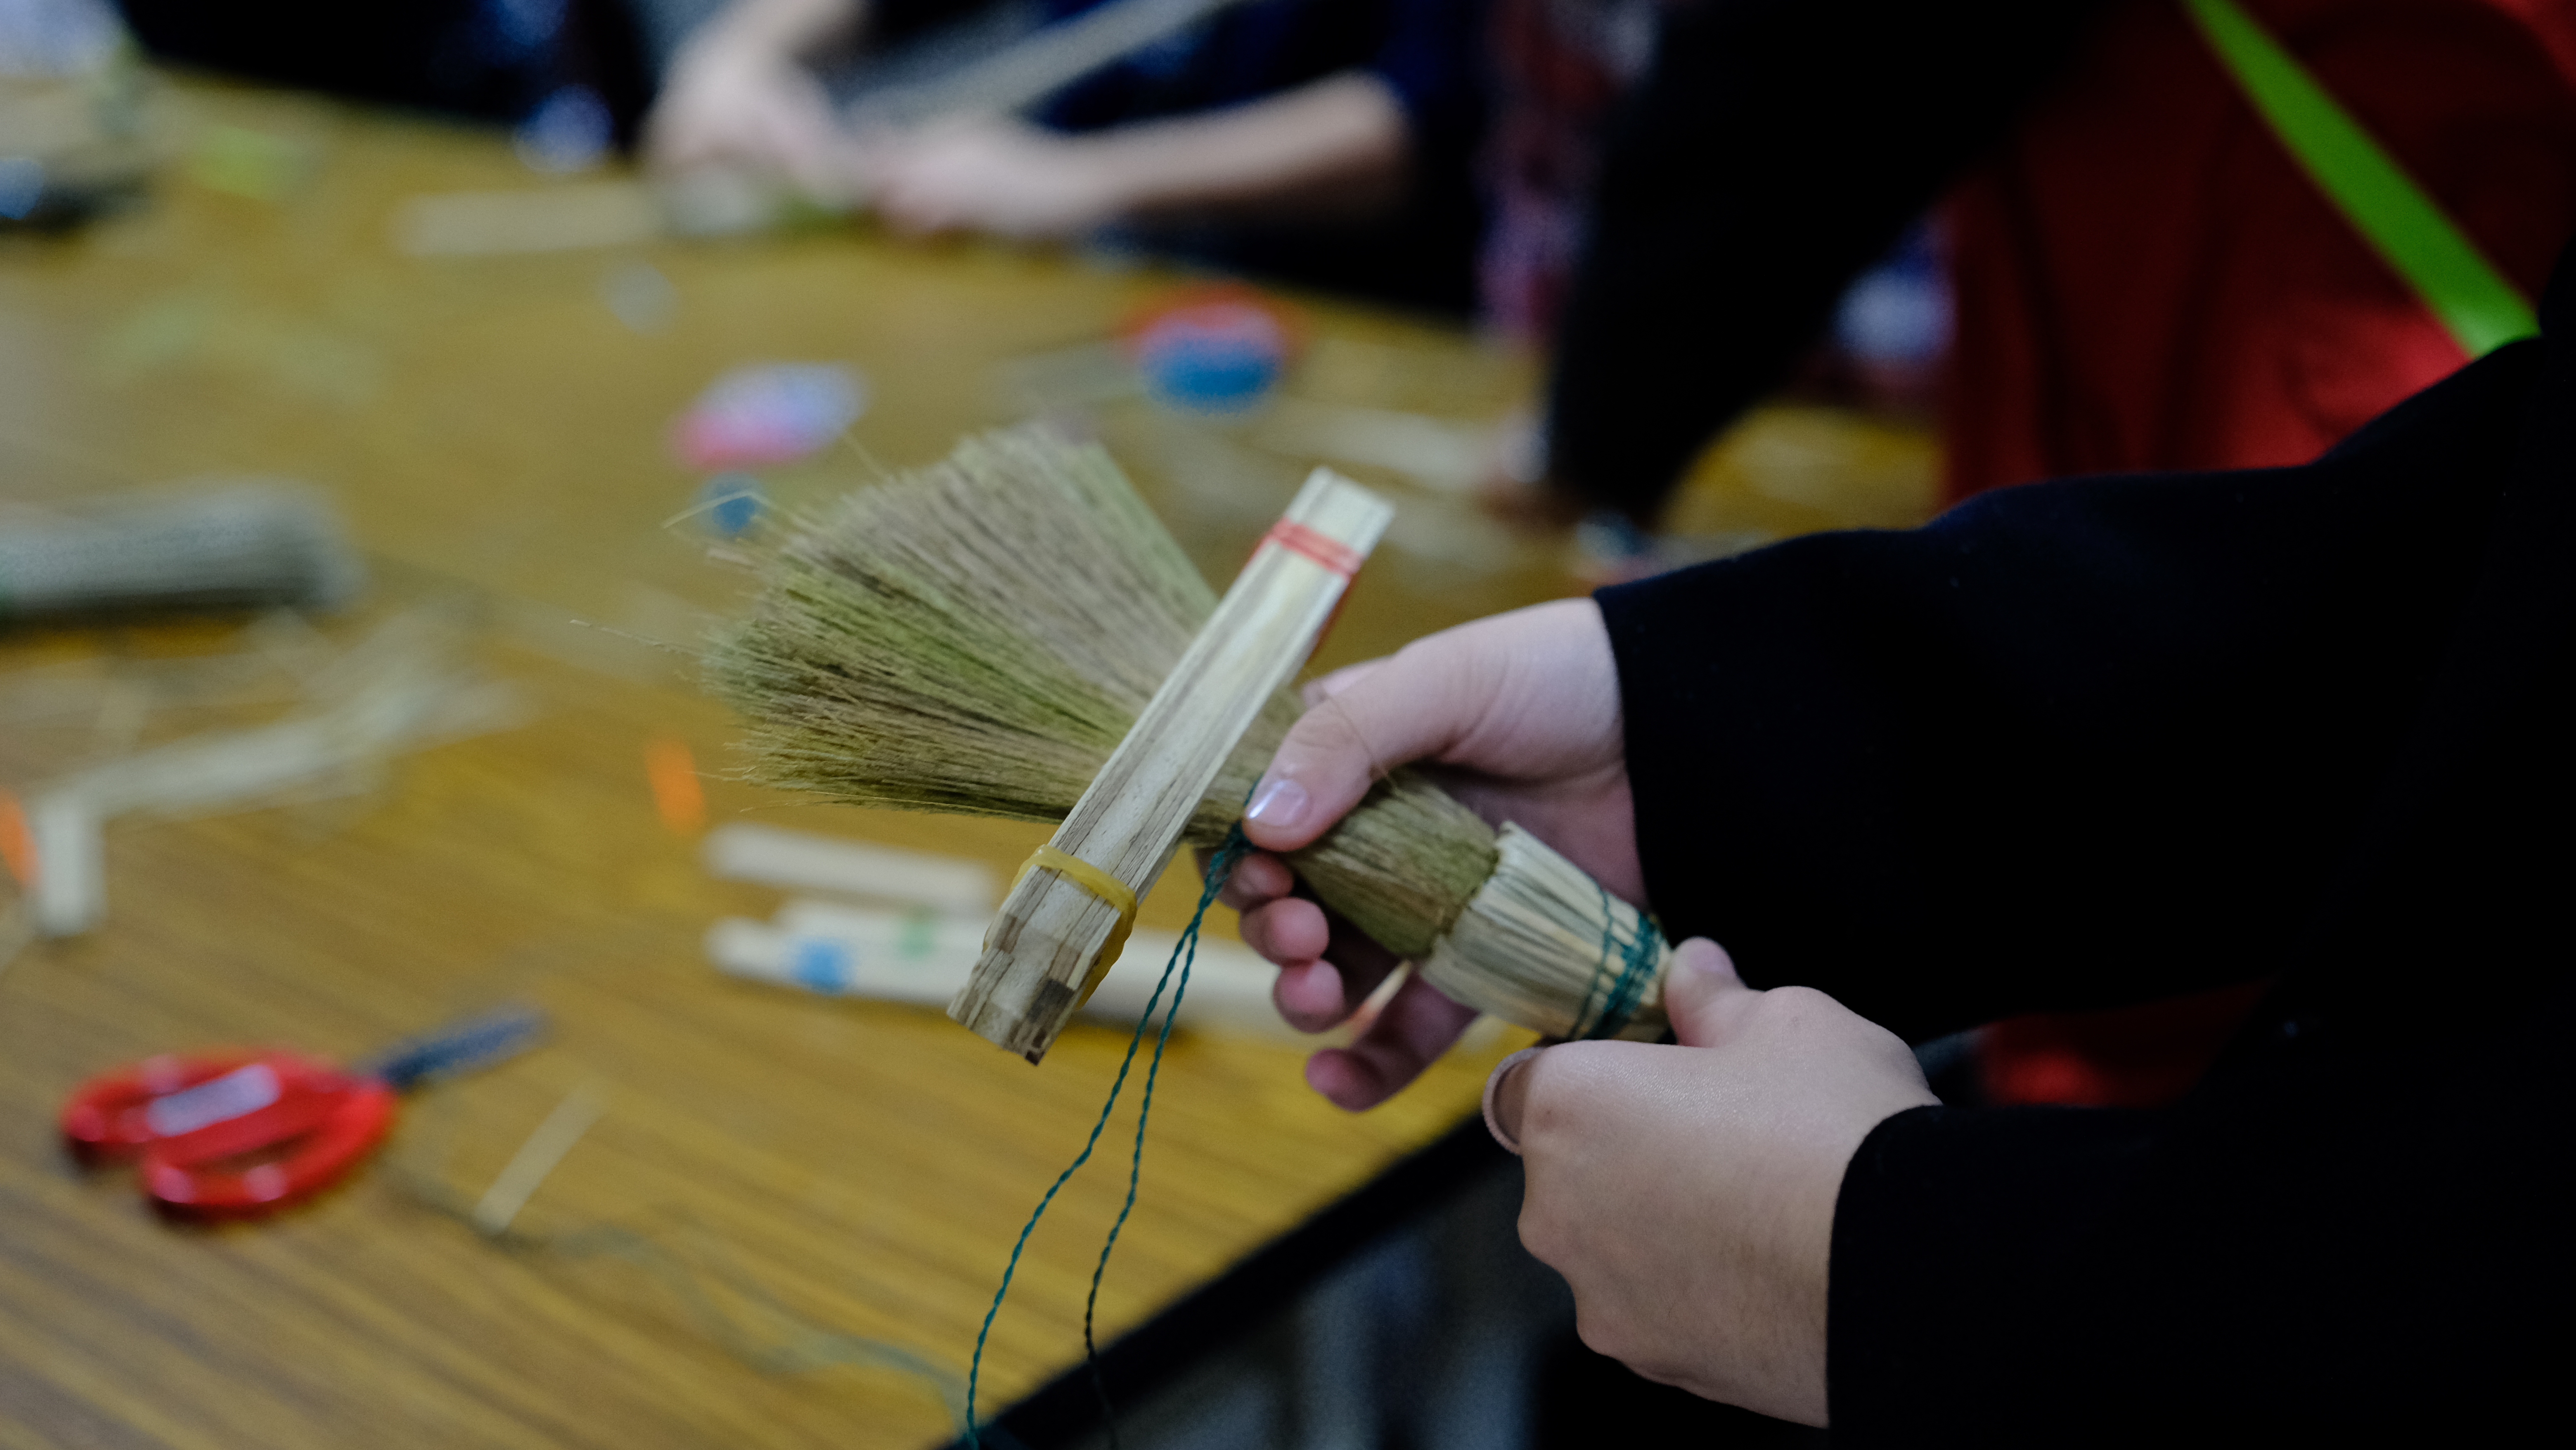 Yilan Lane Goldfish Space Instructors led participants to DIY a straw broom developed by the team.